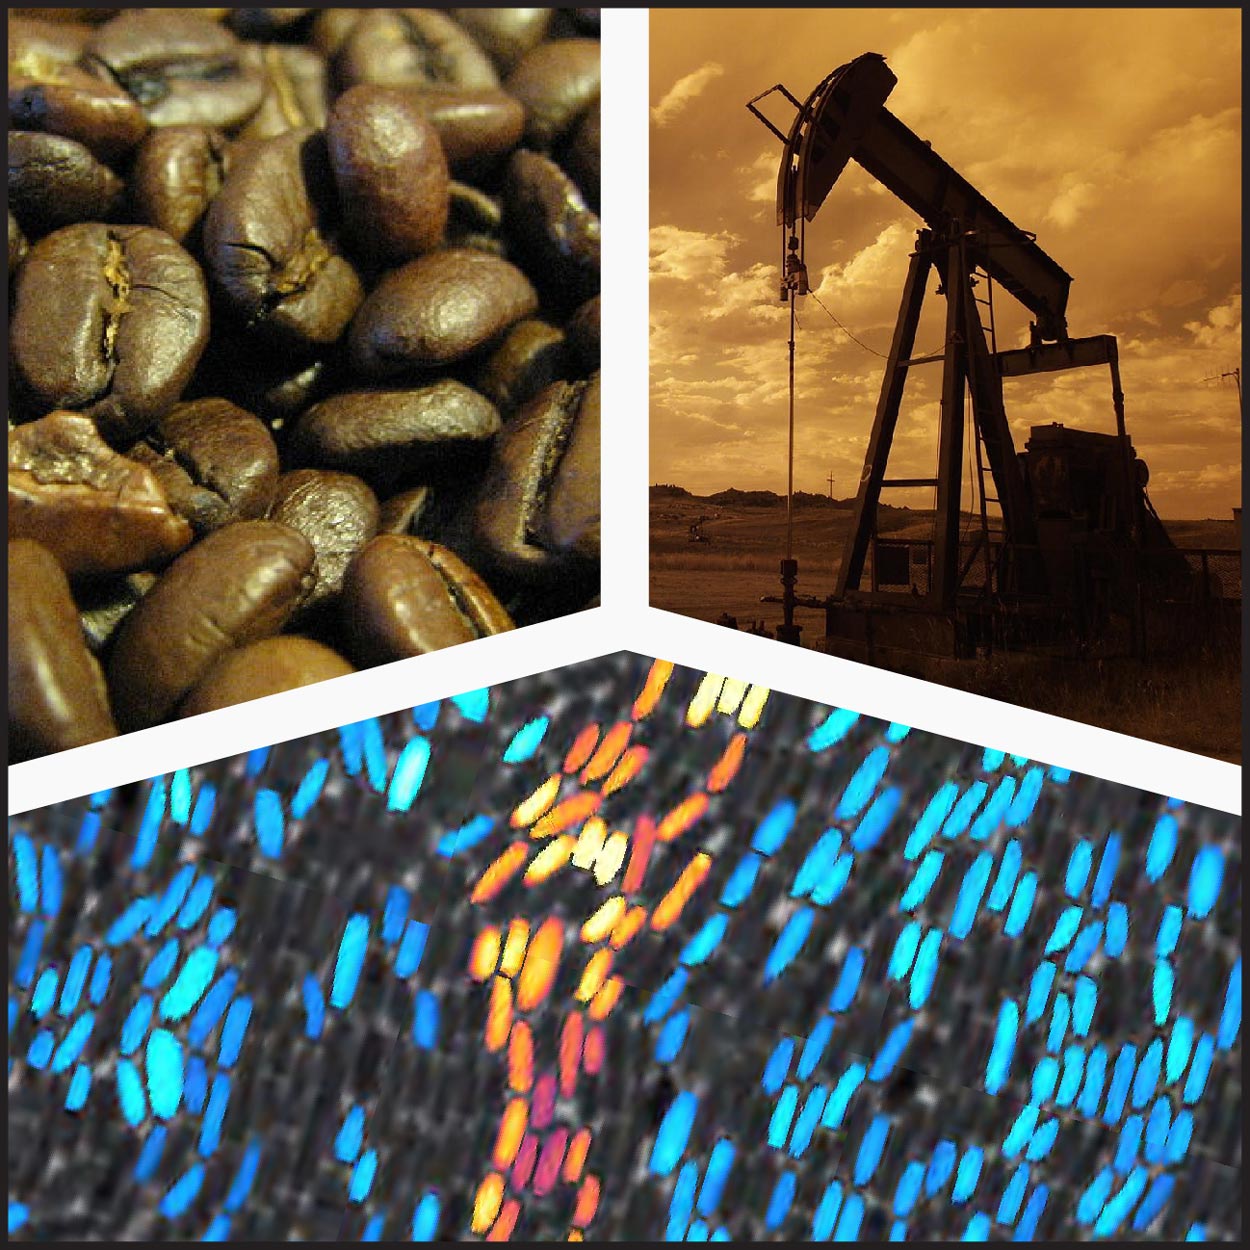 Coffee beans, oil rig, and bacteria